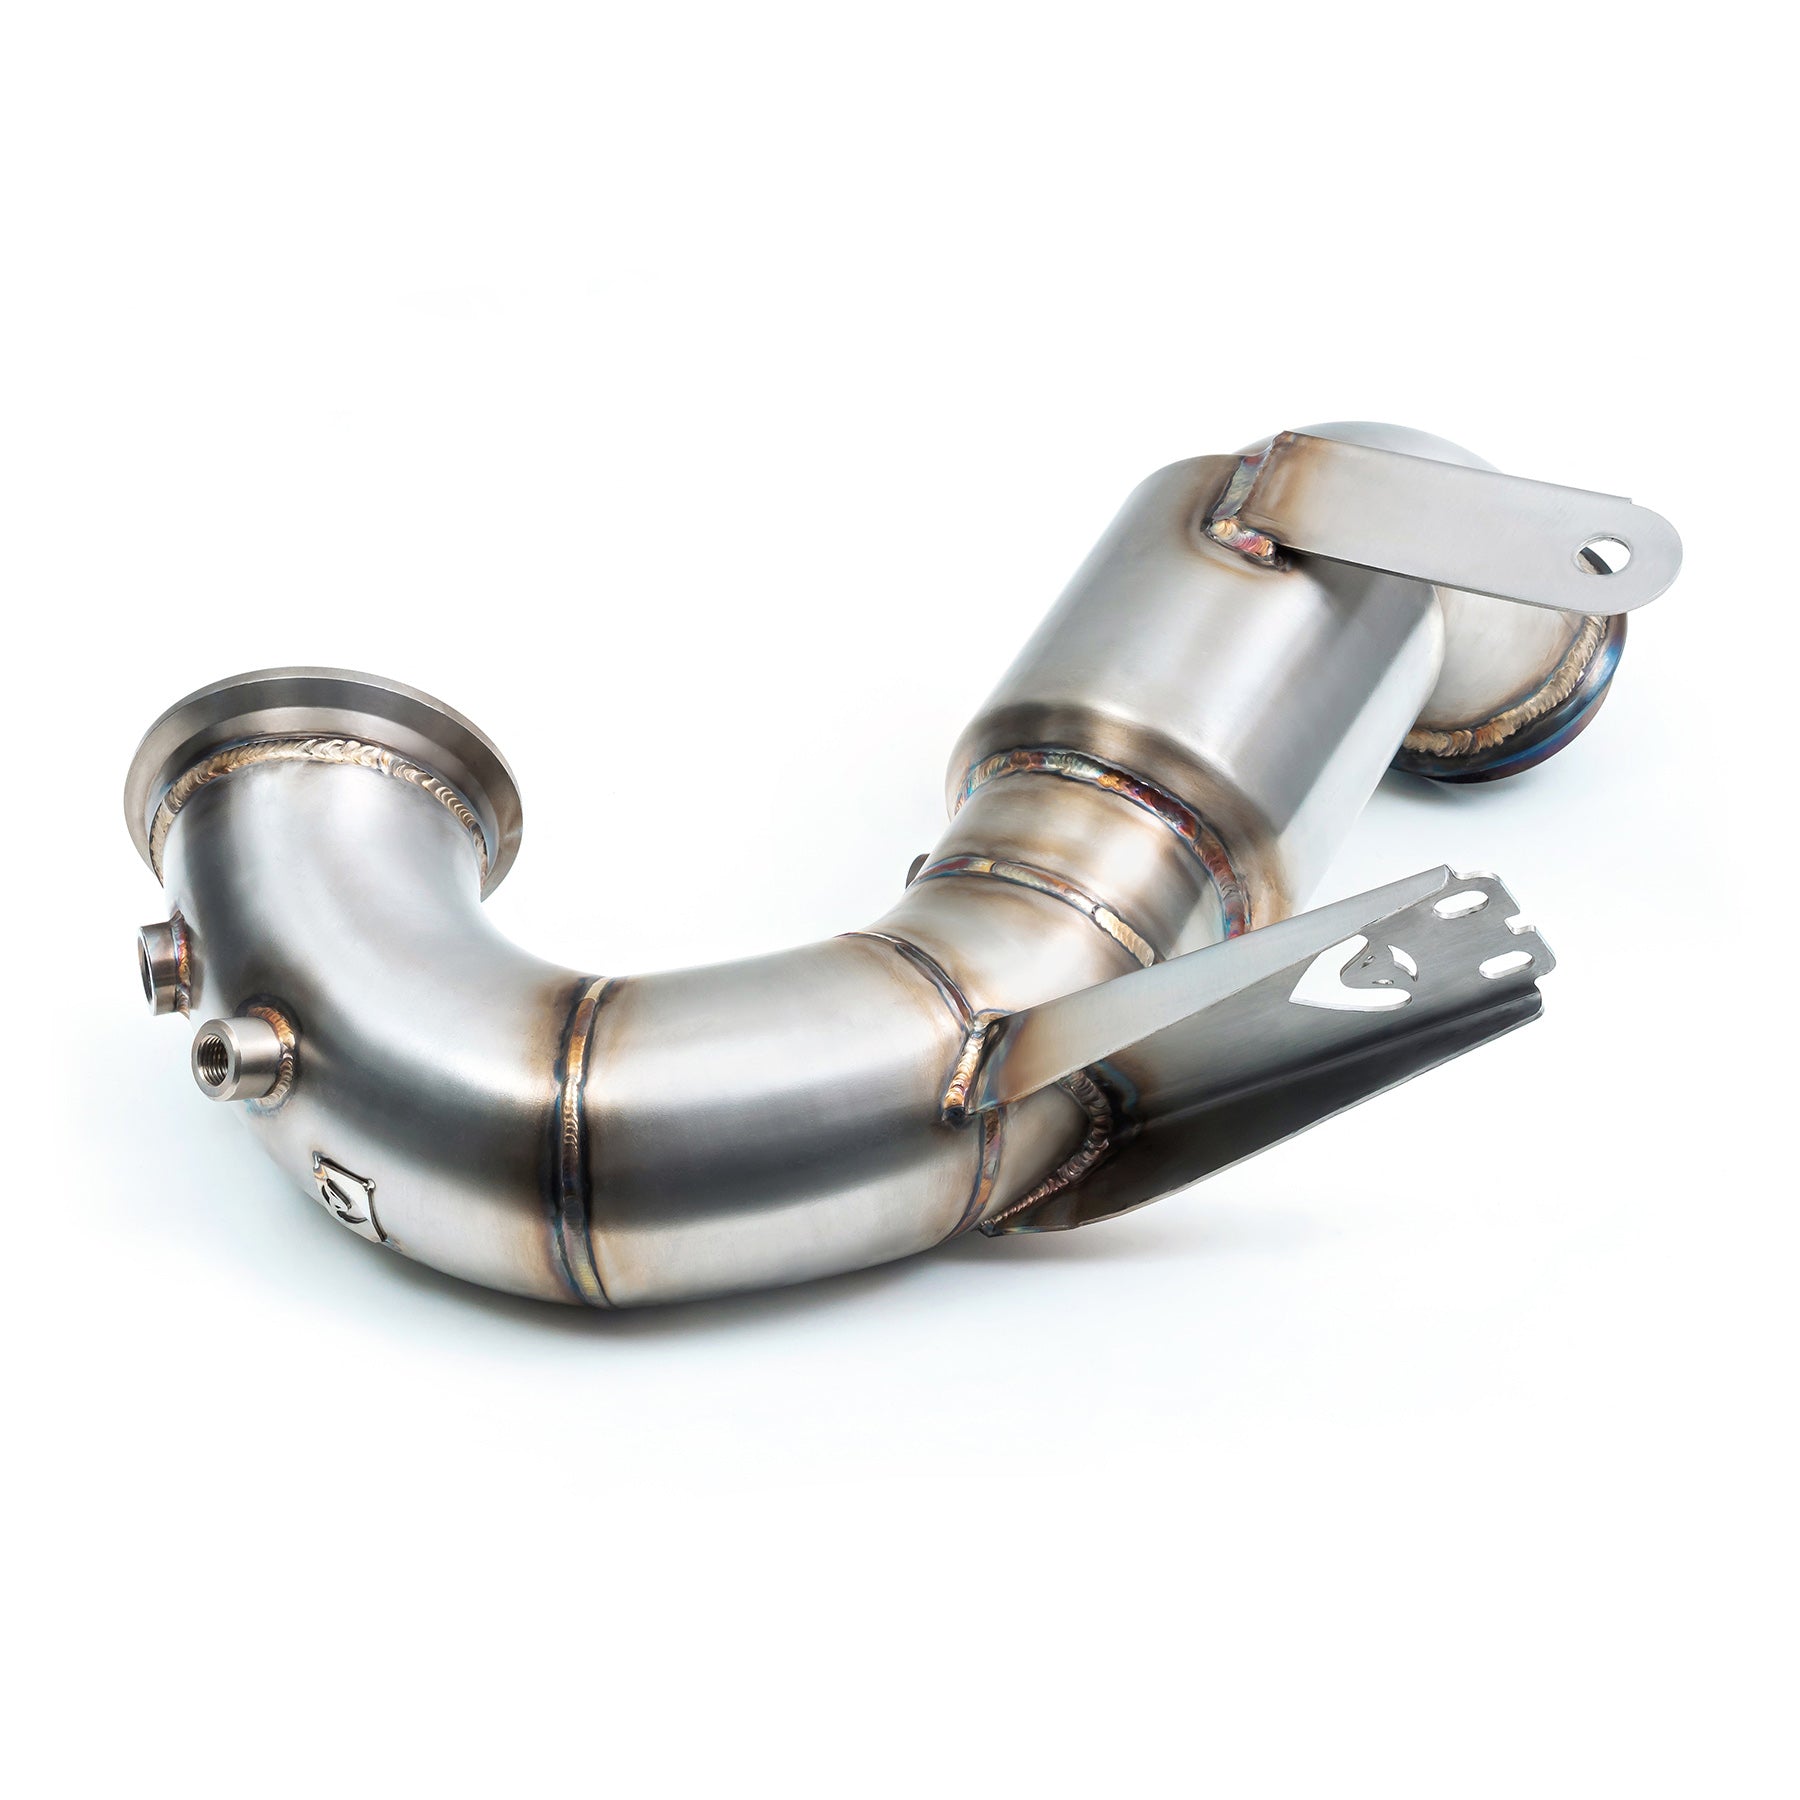 Mercedes-AMG CLA 45 S Front Downpipe Sports Cat / De-Cat Performance Exhaust